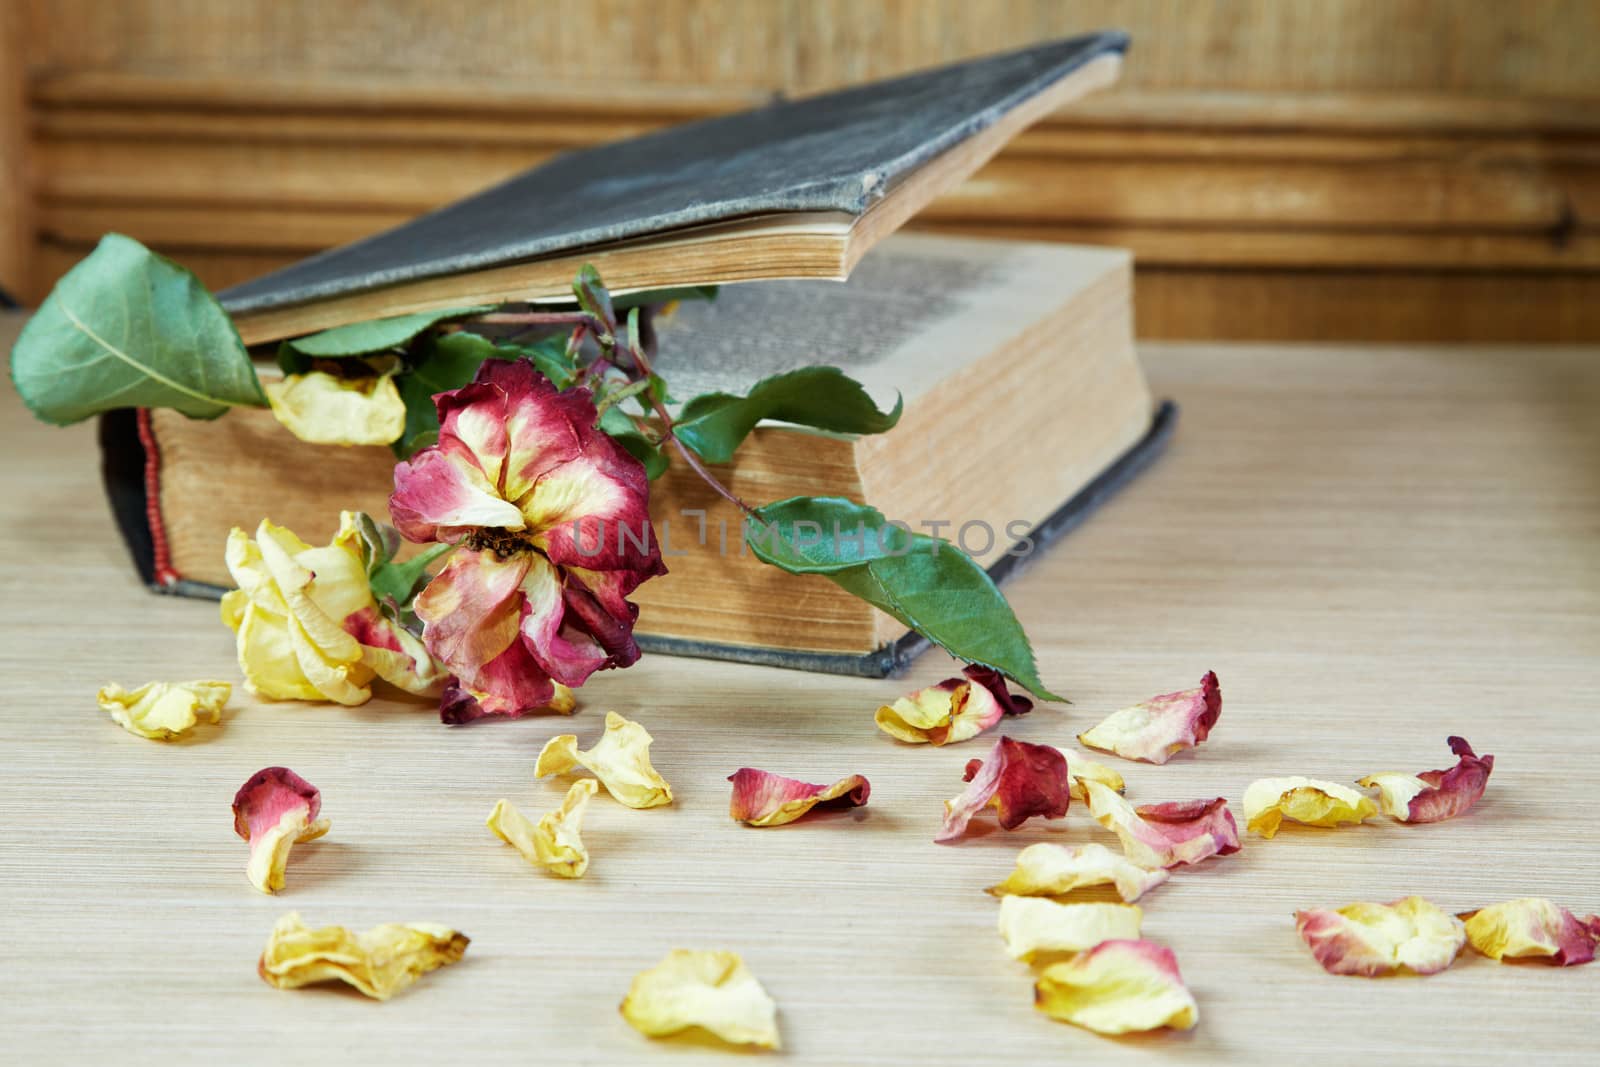 Dry rose and the old book on a table